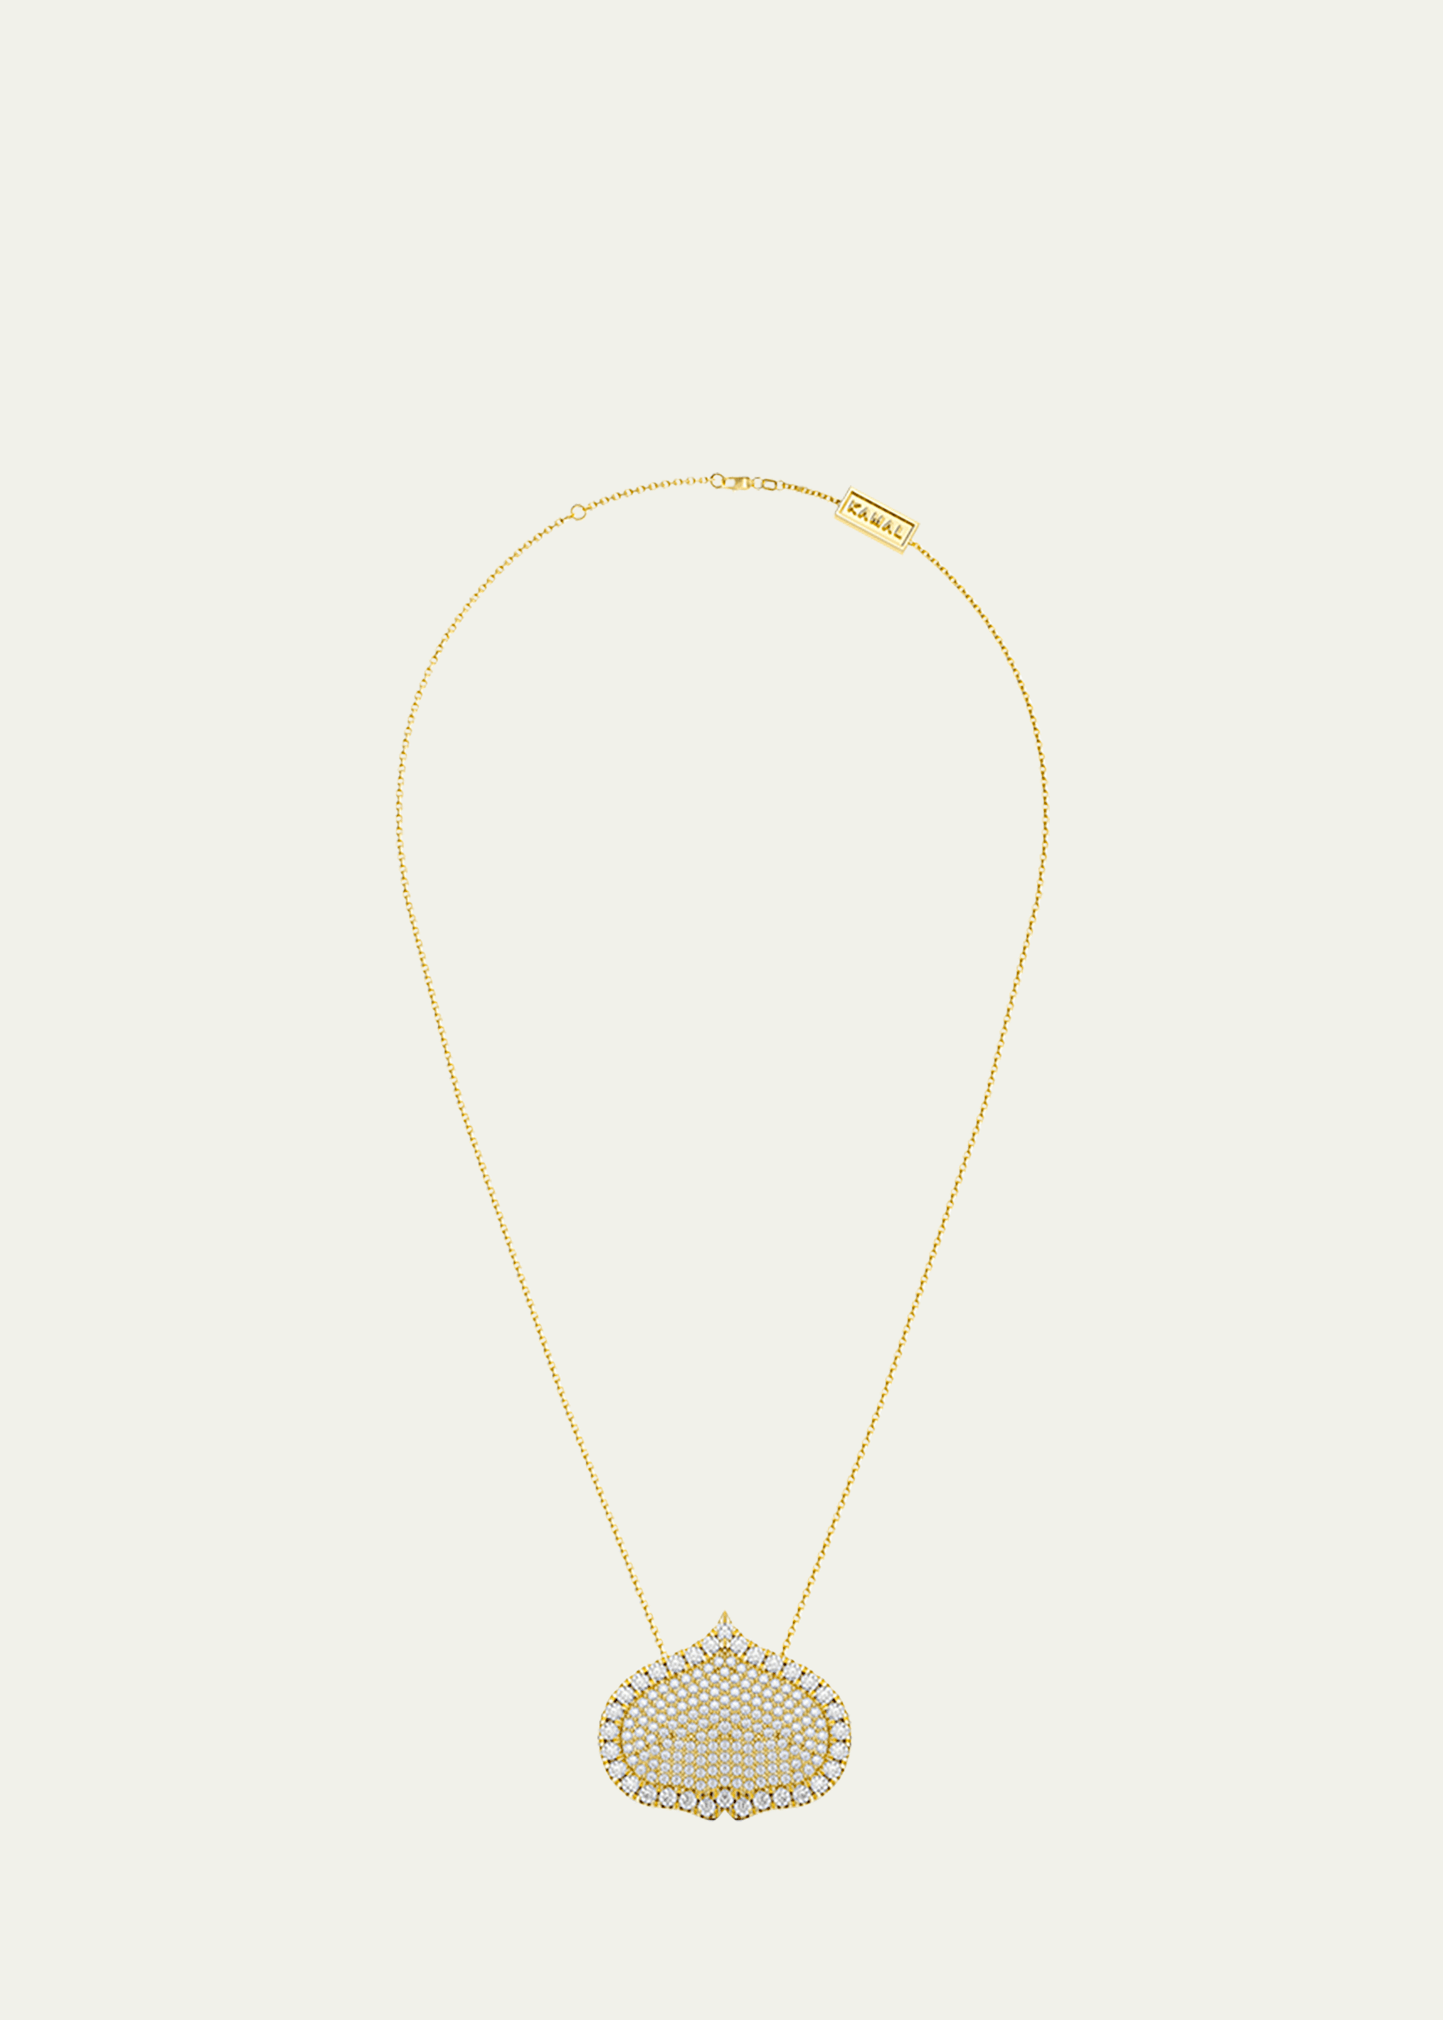 Kamal Eye Adore Diamond Pave Pendant Necklace, 25mm In Yellow Gold